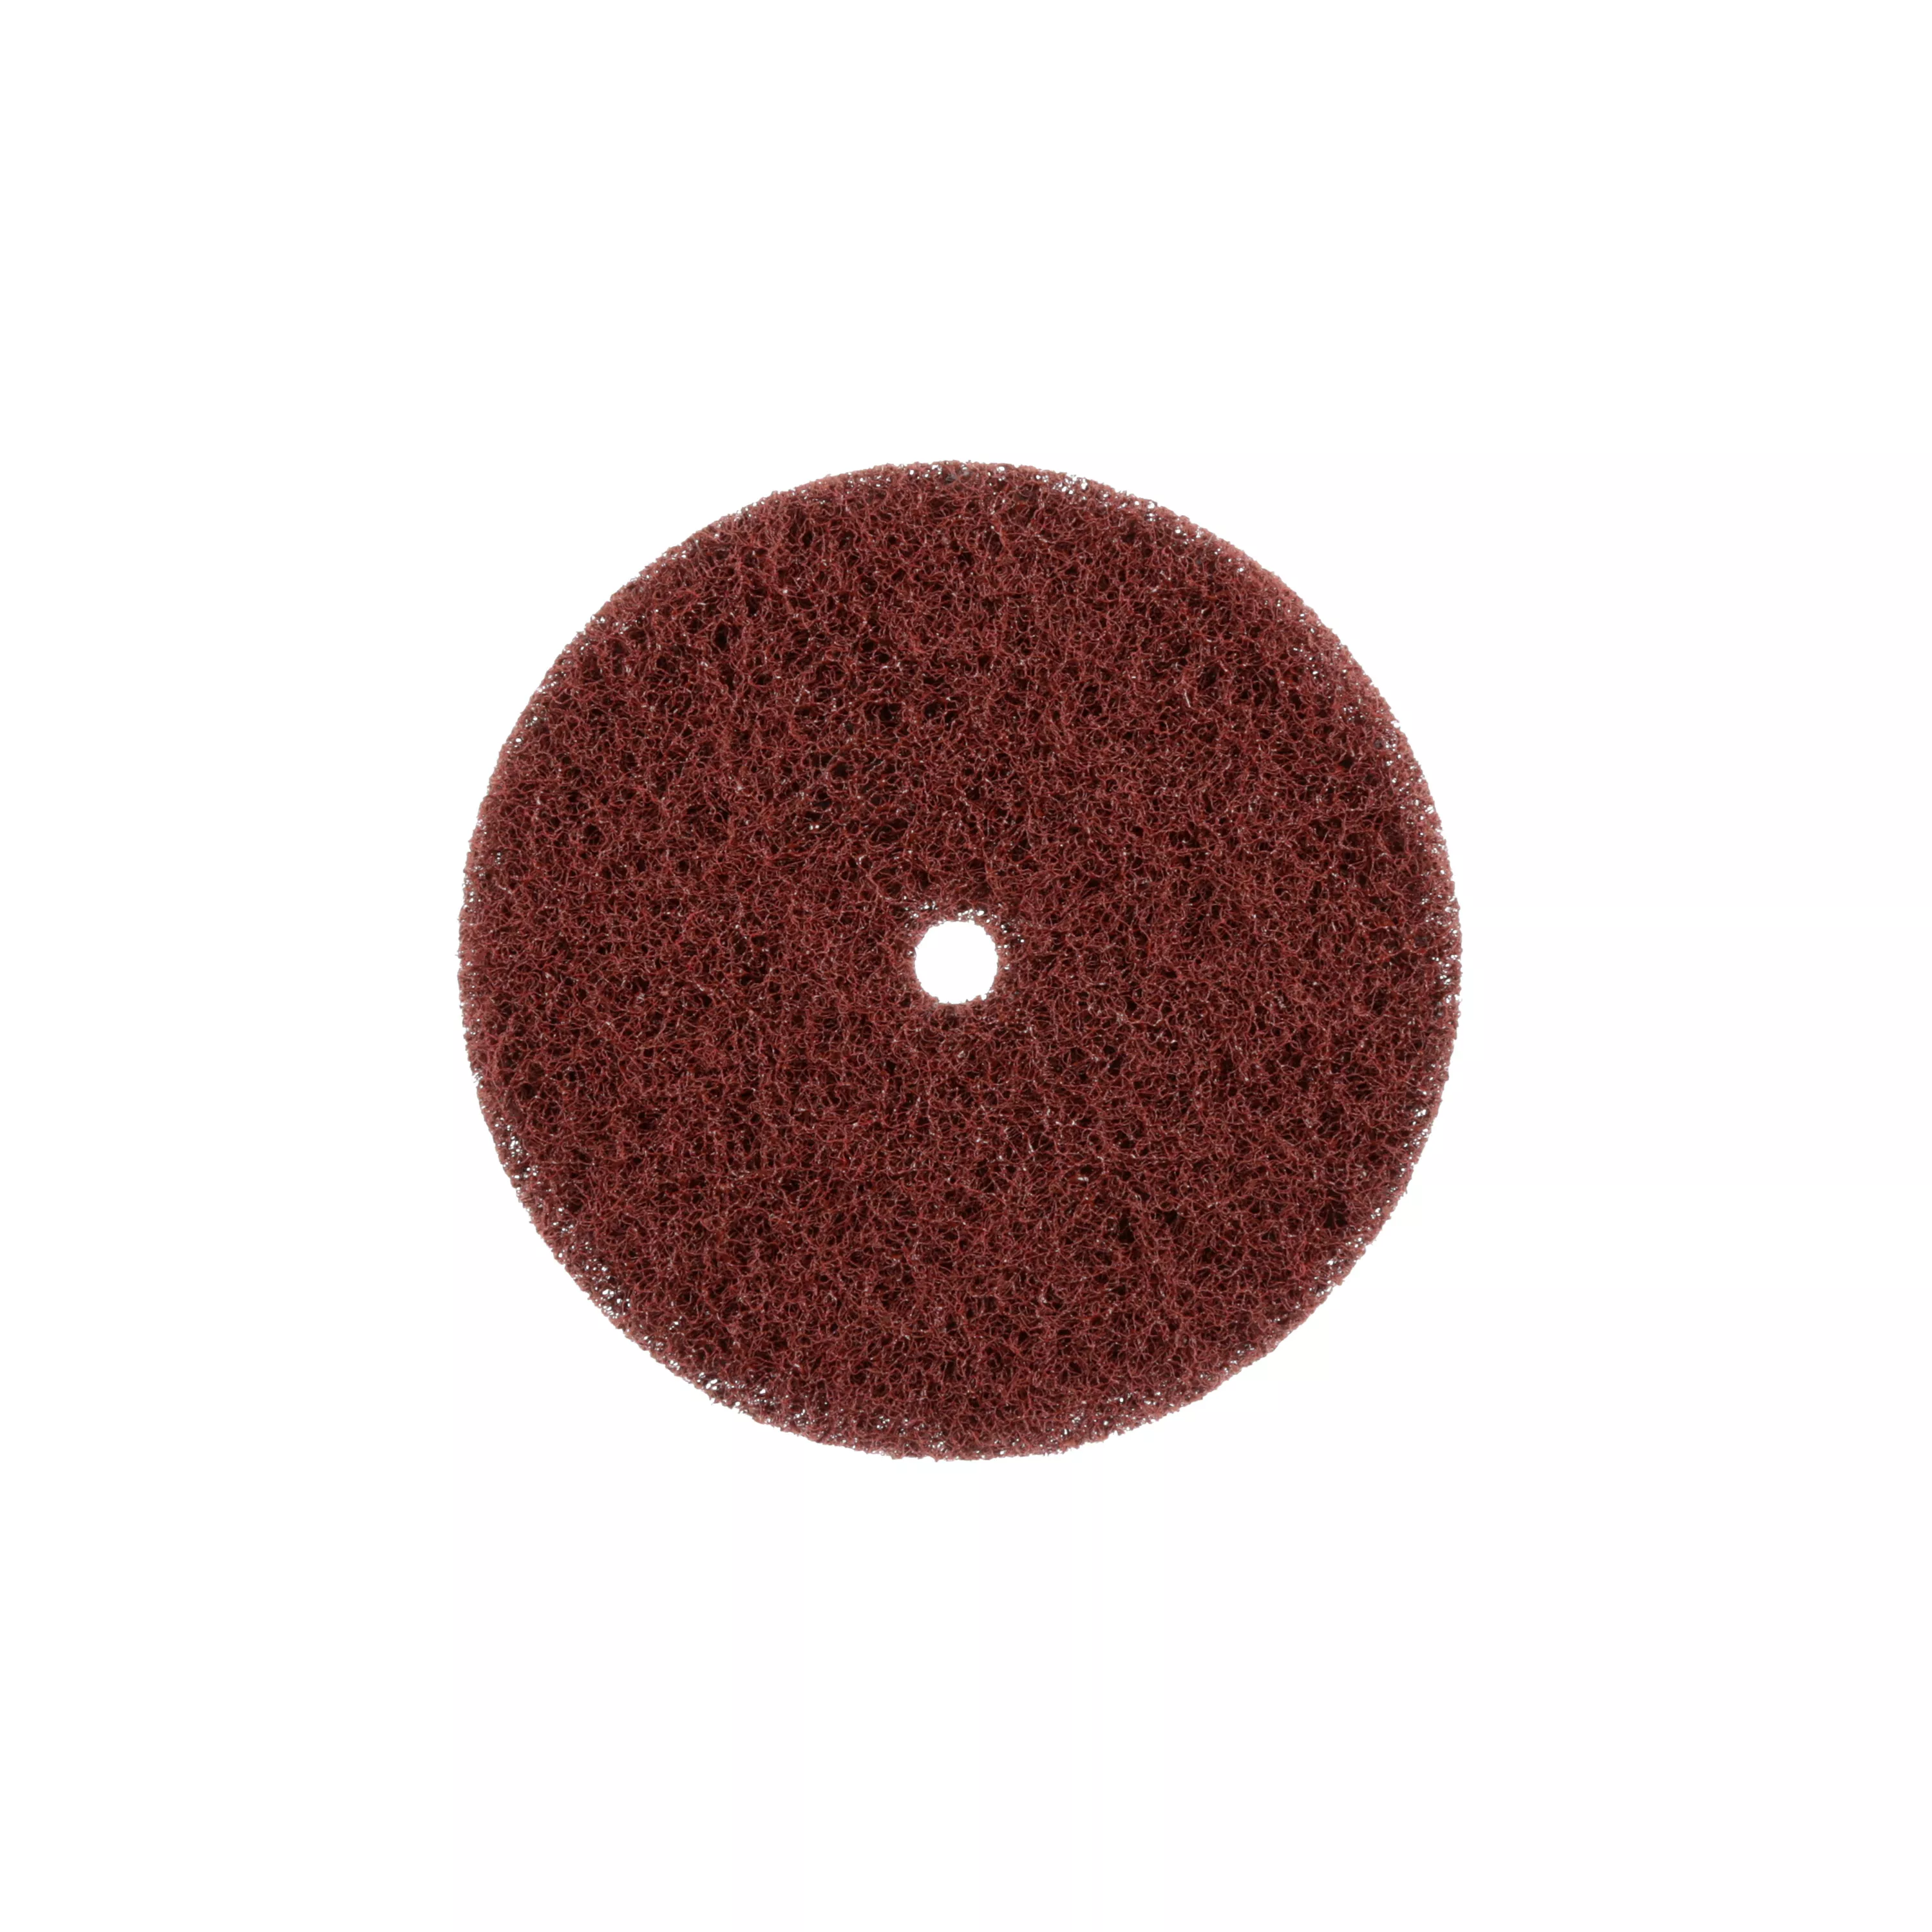 Standard Abrasives™ Buff and Blend Hook and Loop GP Vacuum Disc, 831620,
5 in A MED 8 Holes, 10/Pac, 100 ea/Case